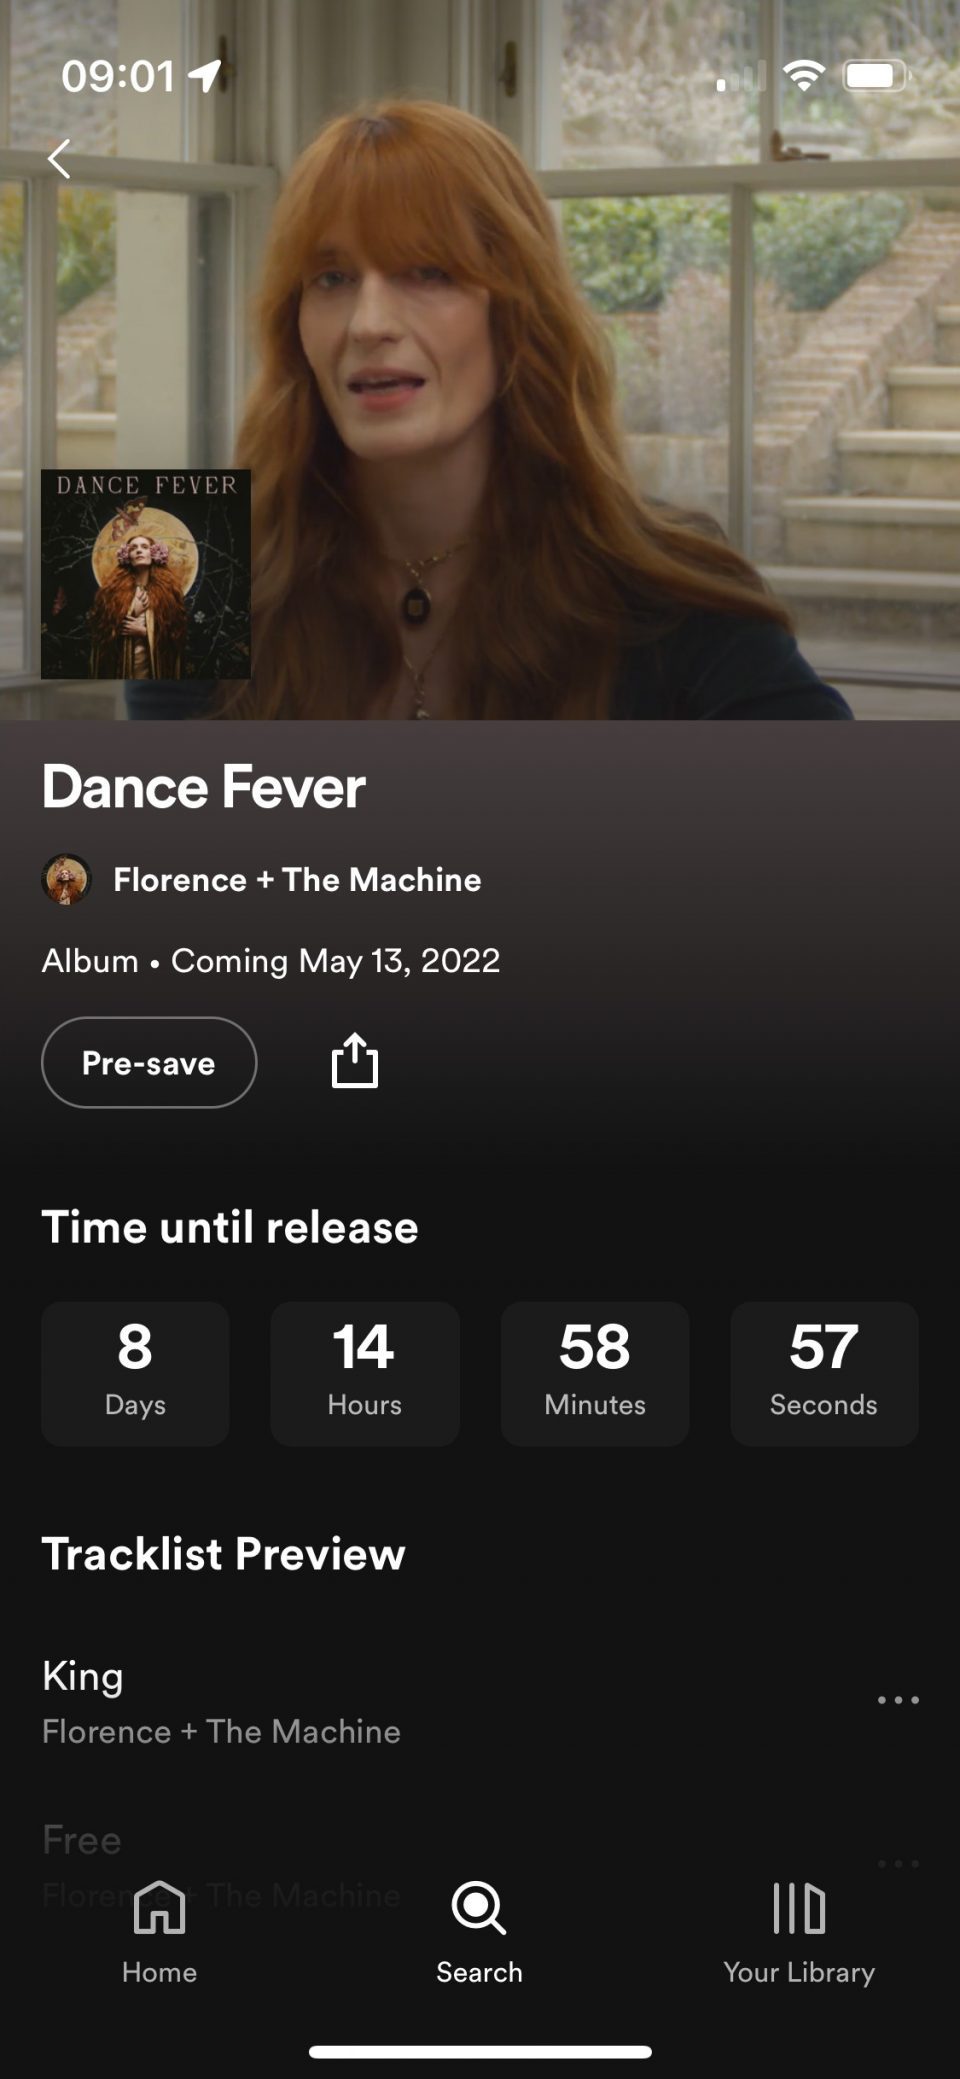 Spotify's new on-platform Pre-save button on Florence + The Machines new album Dance Fever